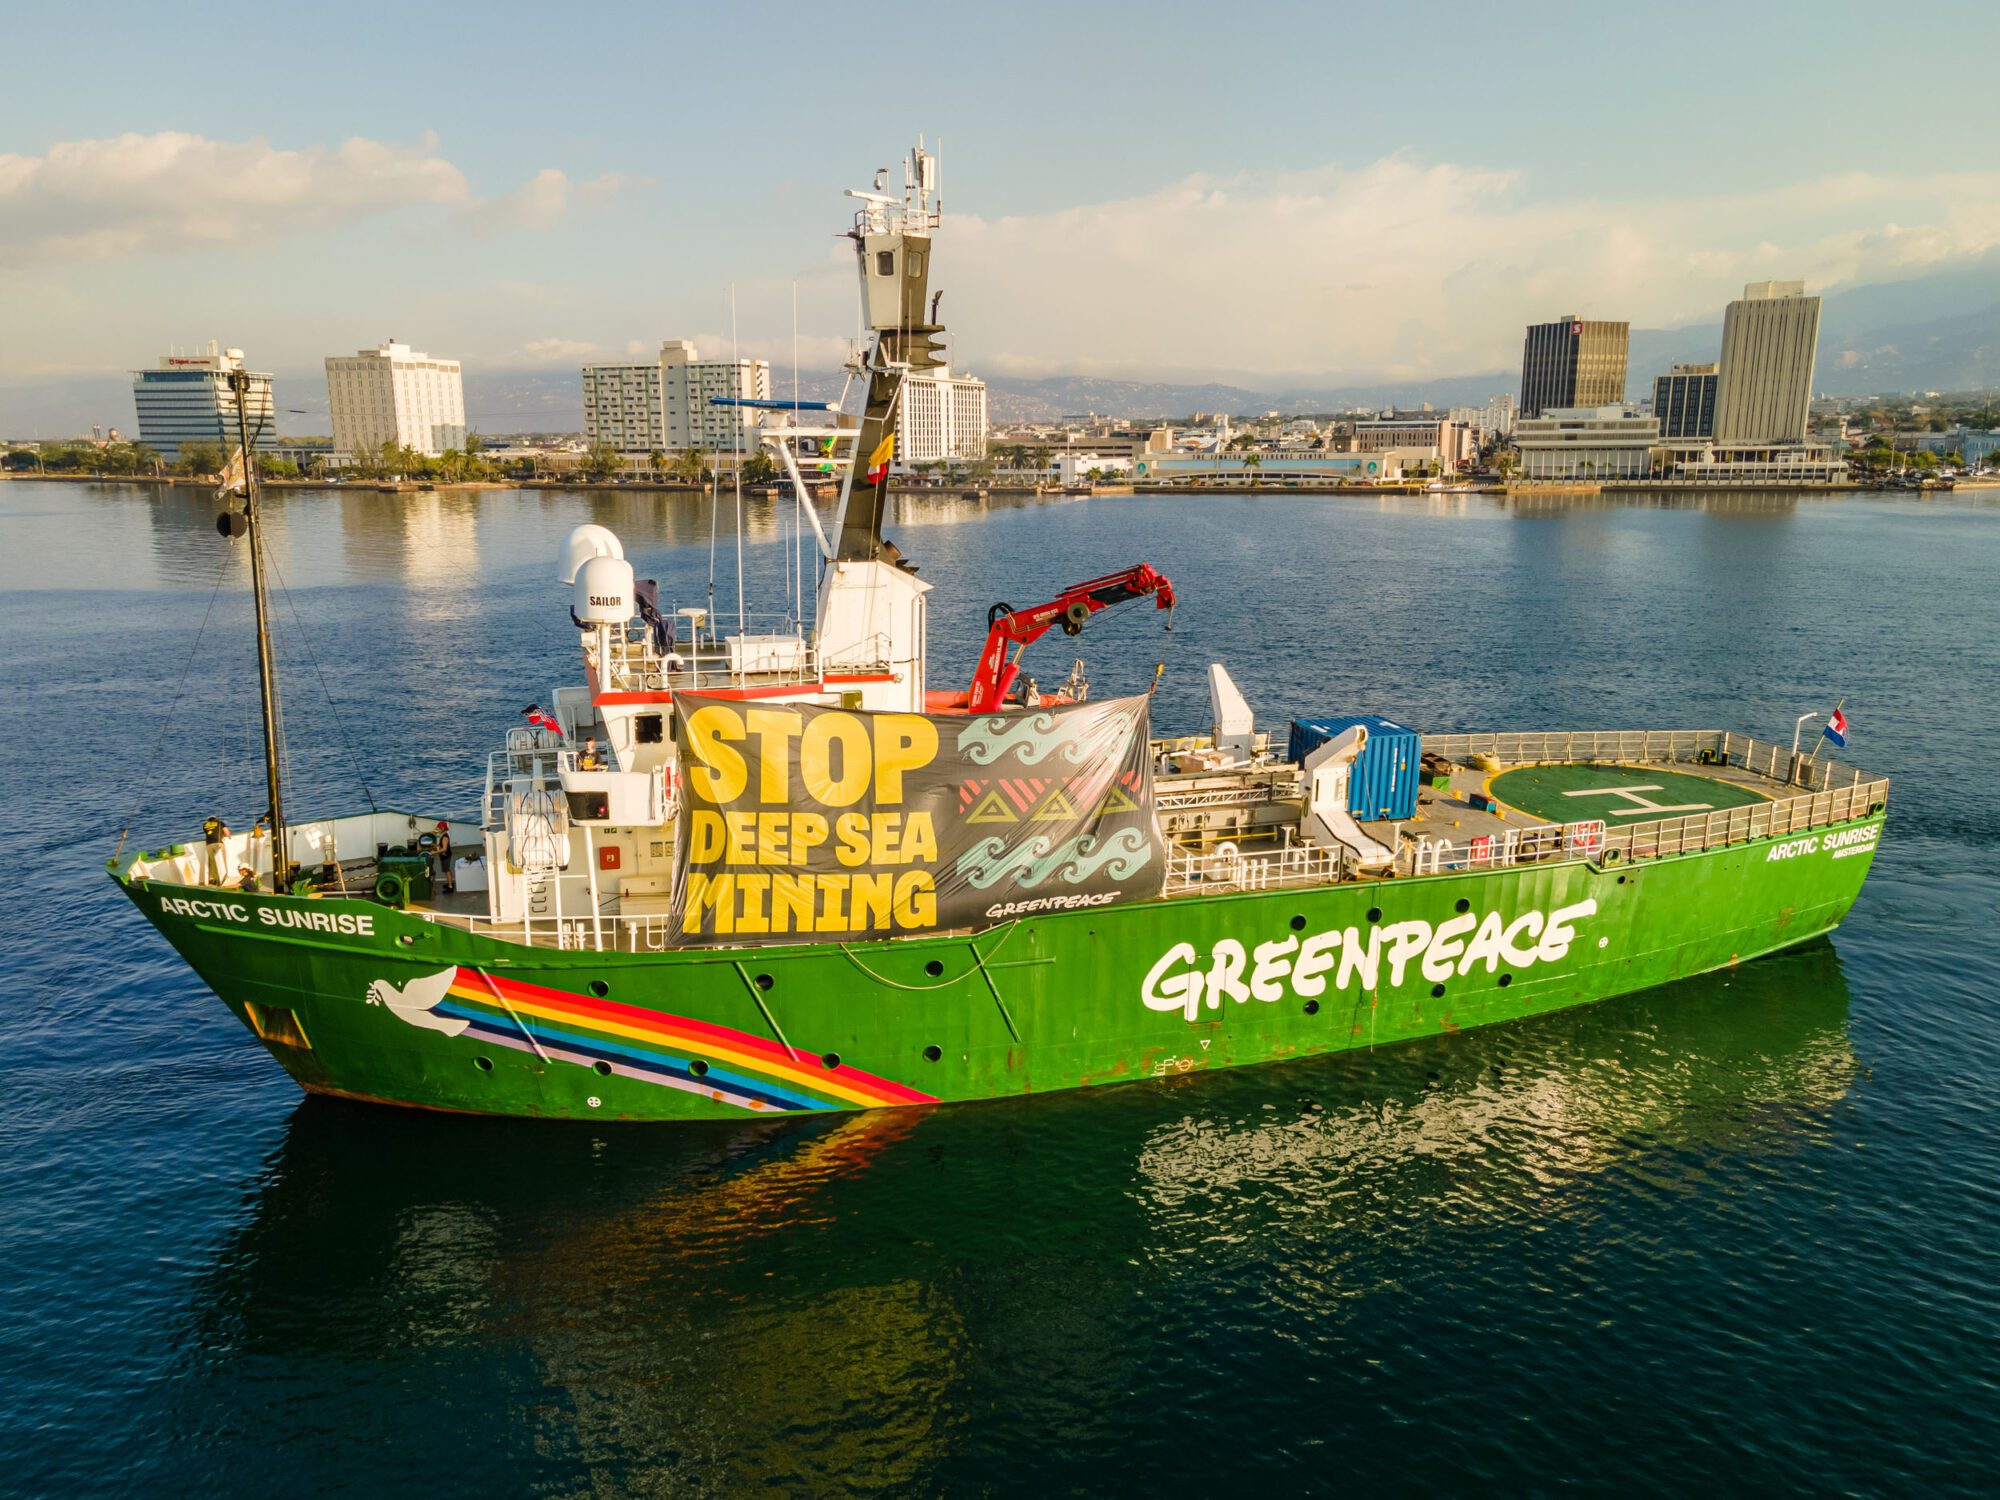 A bright green ship with a rainbow and white bird motif on its front sits in a still bay with buildings in the distance. There is a black square banner on the ship that reads "Stop deep sea mining"